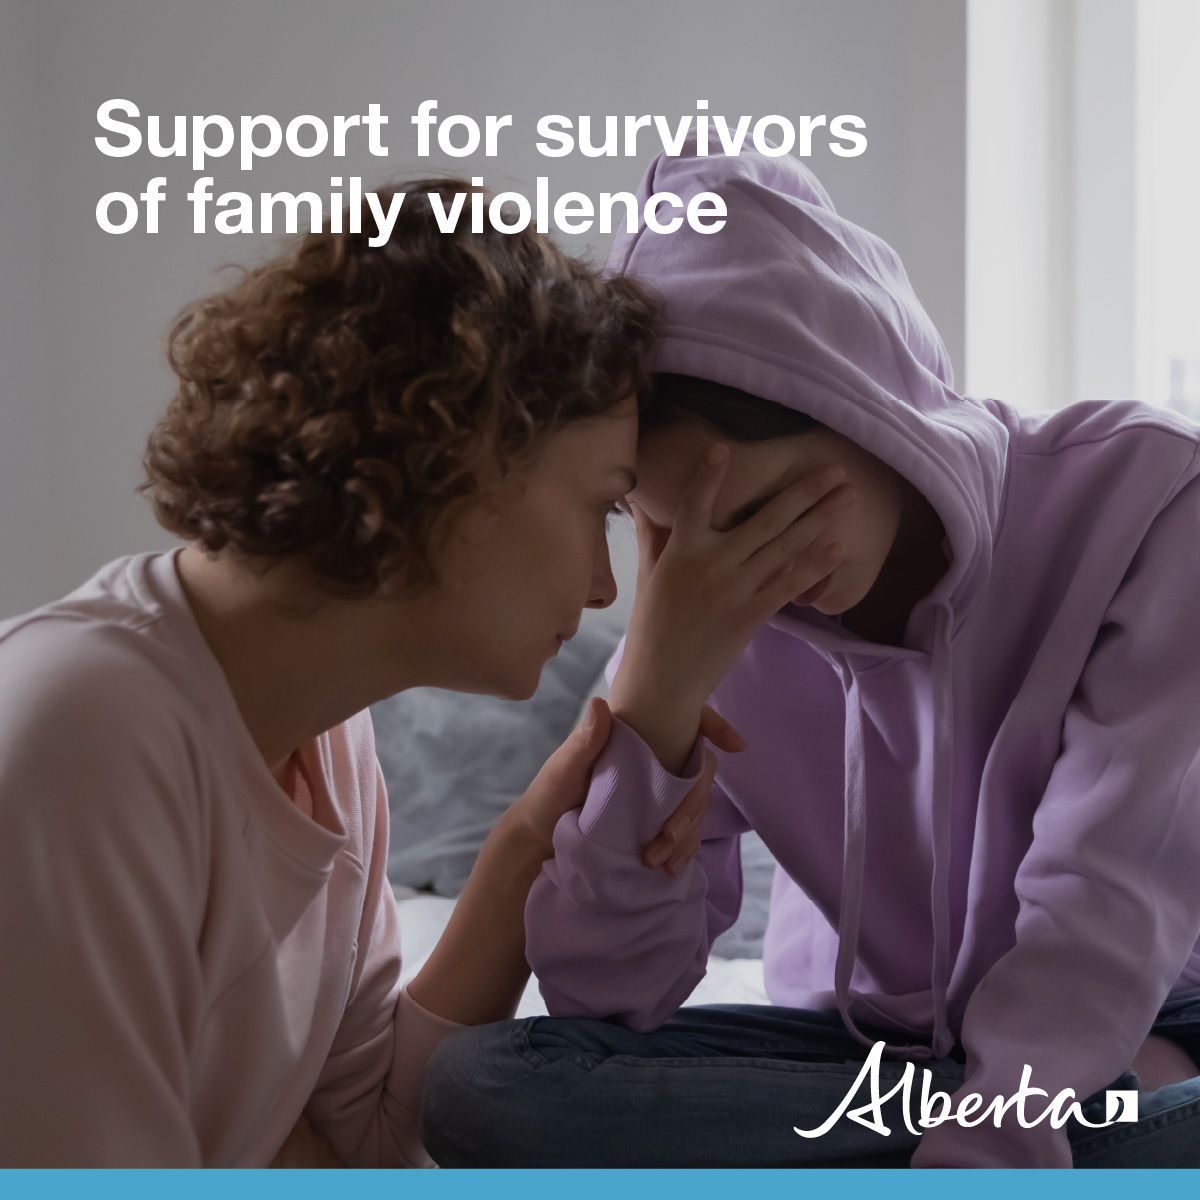 If you’re at risk of family violence, you don't have to feel trapped in your home. A Safer Spaces Certificate allows you to end a residential tenancy agreement without financial penalty. For details, see alberta.ca/safer-spaces-c… or call 310-1818.